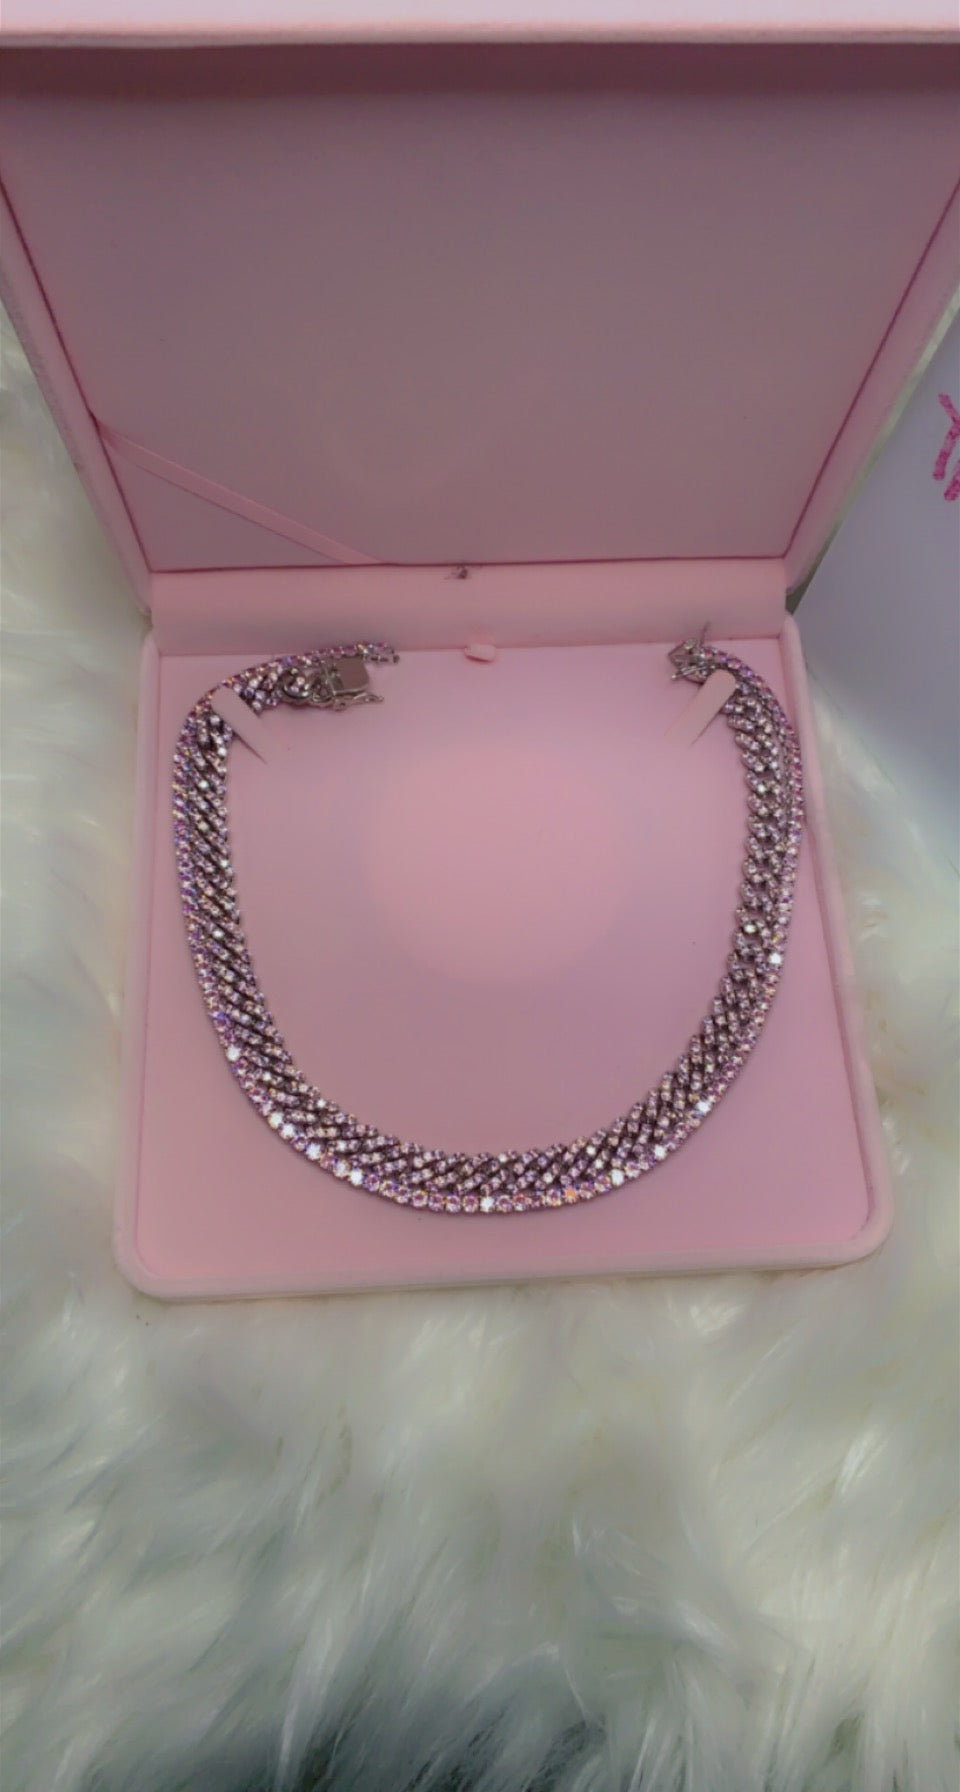 Icy Girl Pretty N Pink 2 piece necklace set